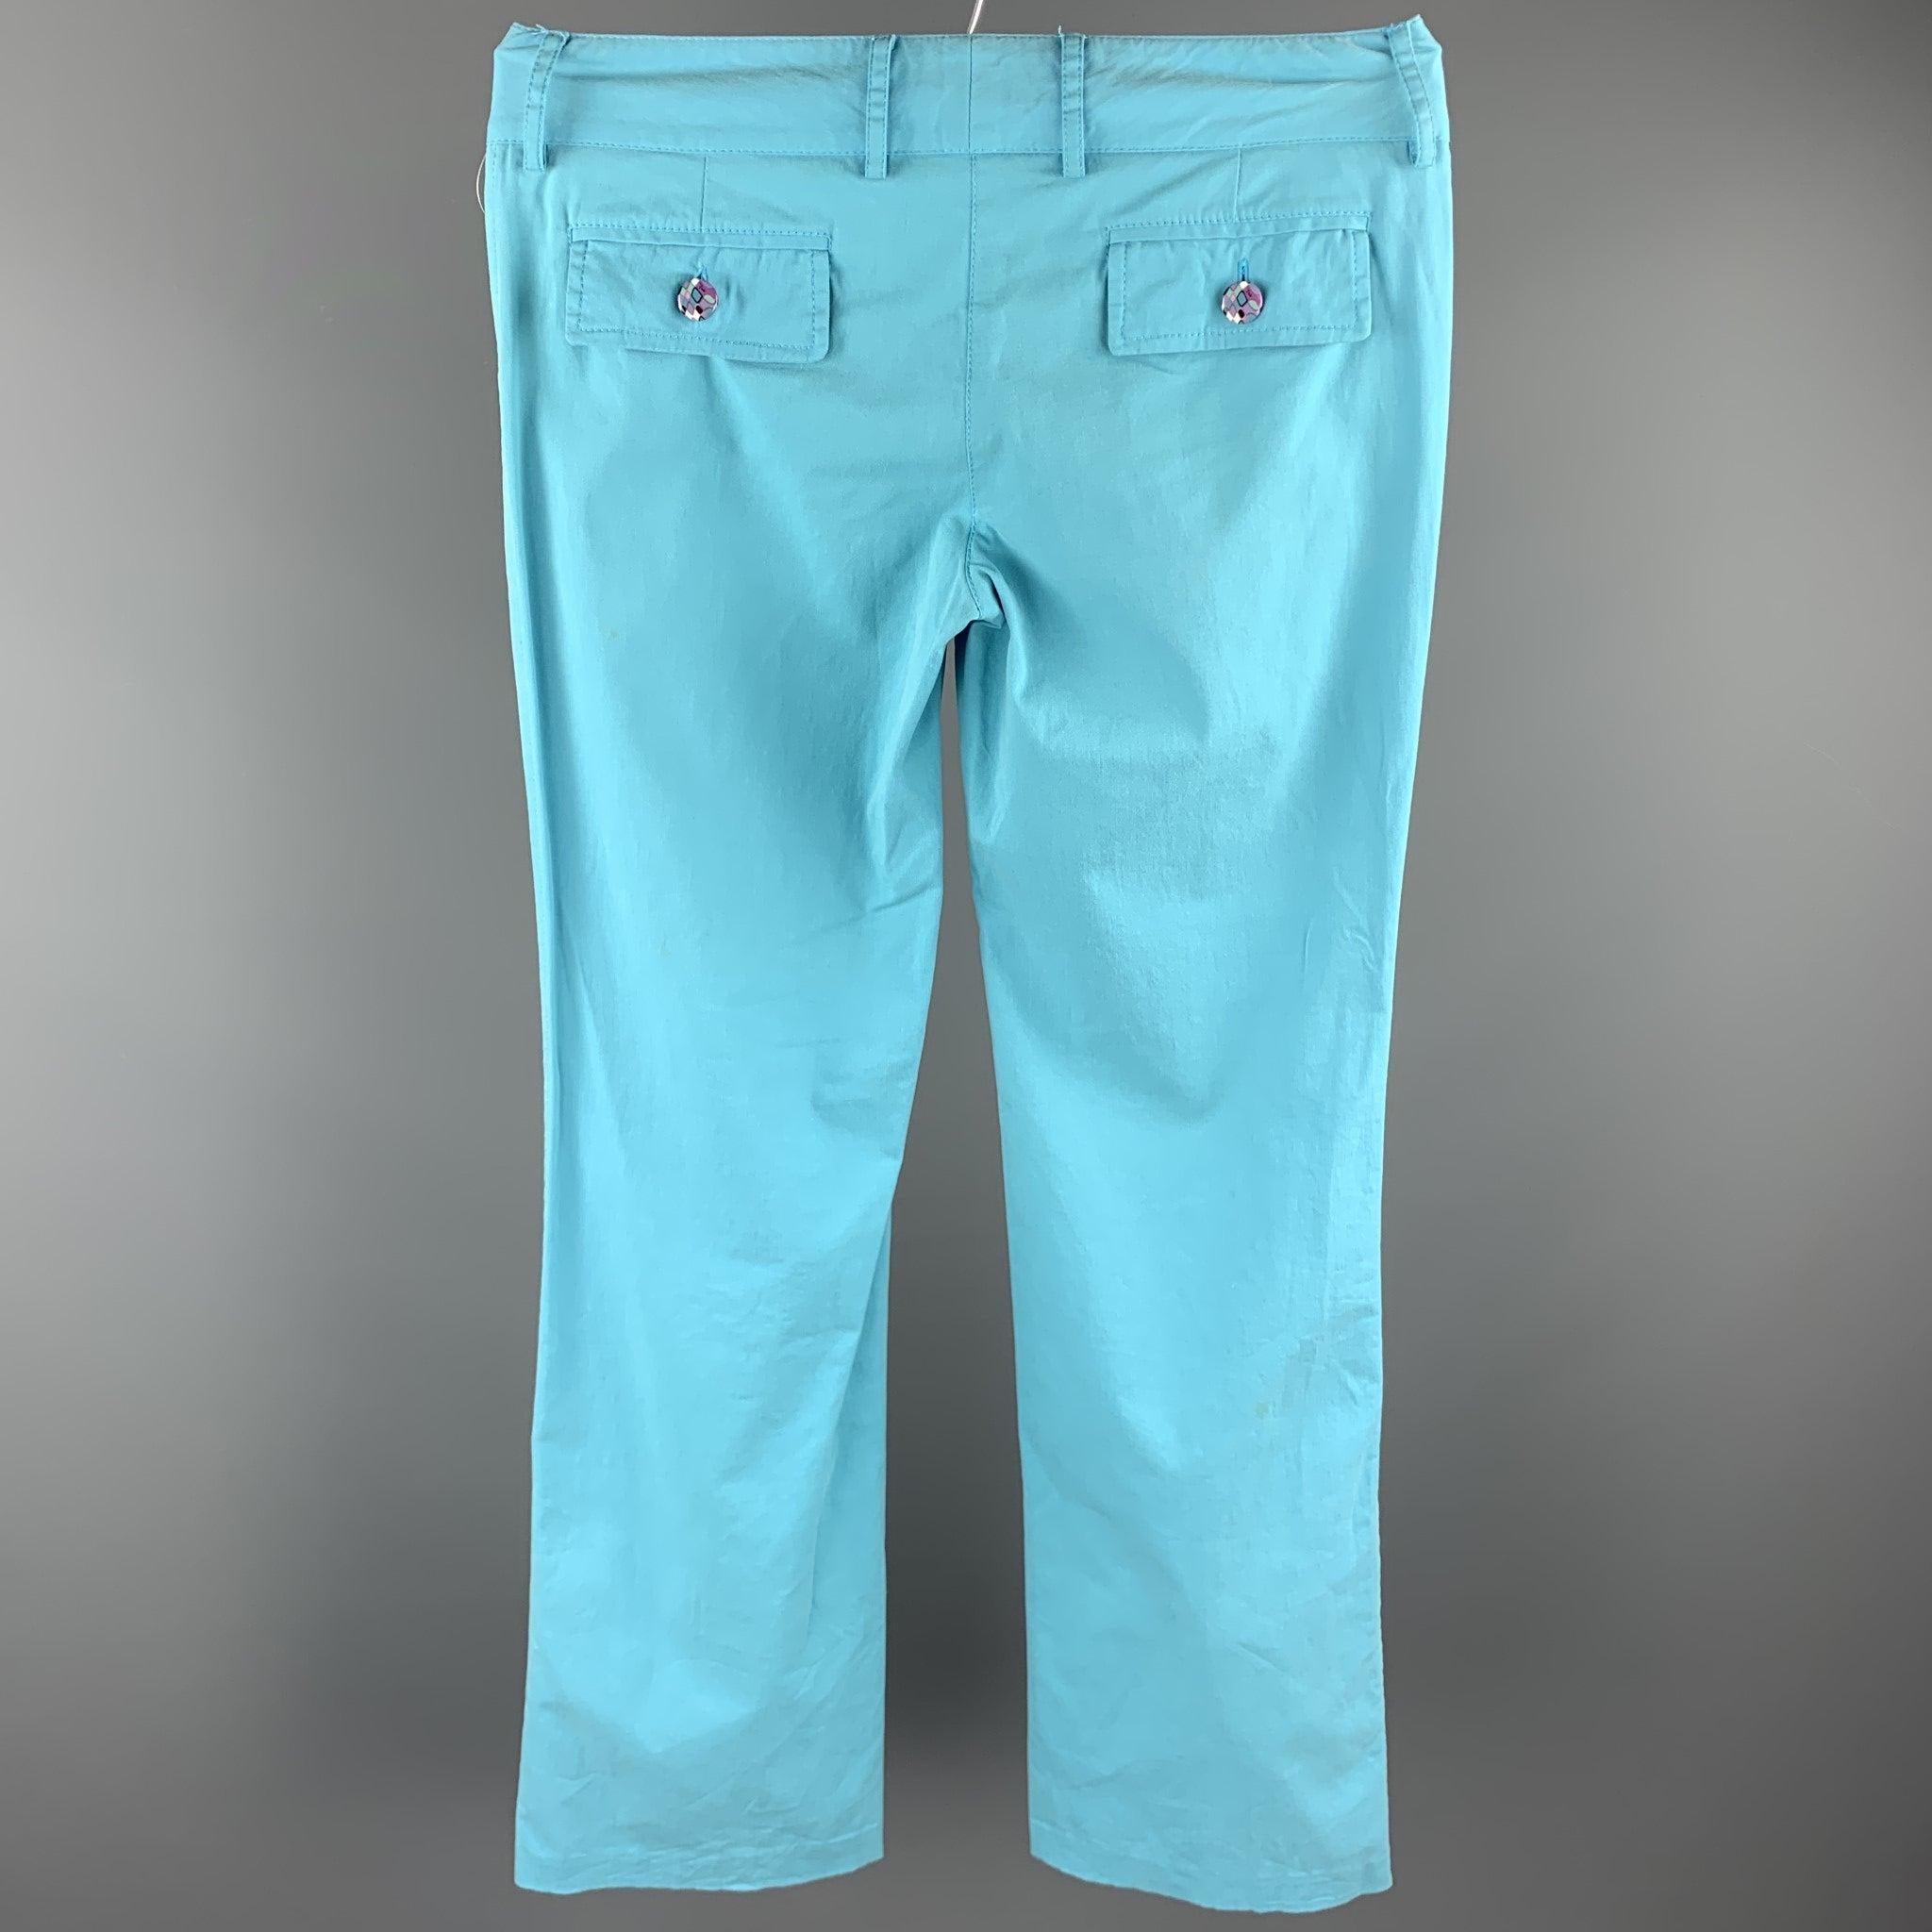 EMILIO PUCCI Size 6 Turquoise Cotton Straight Leg Casual Pants In Good Condition For Sale In San Francisco, CA